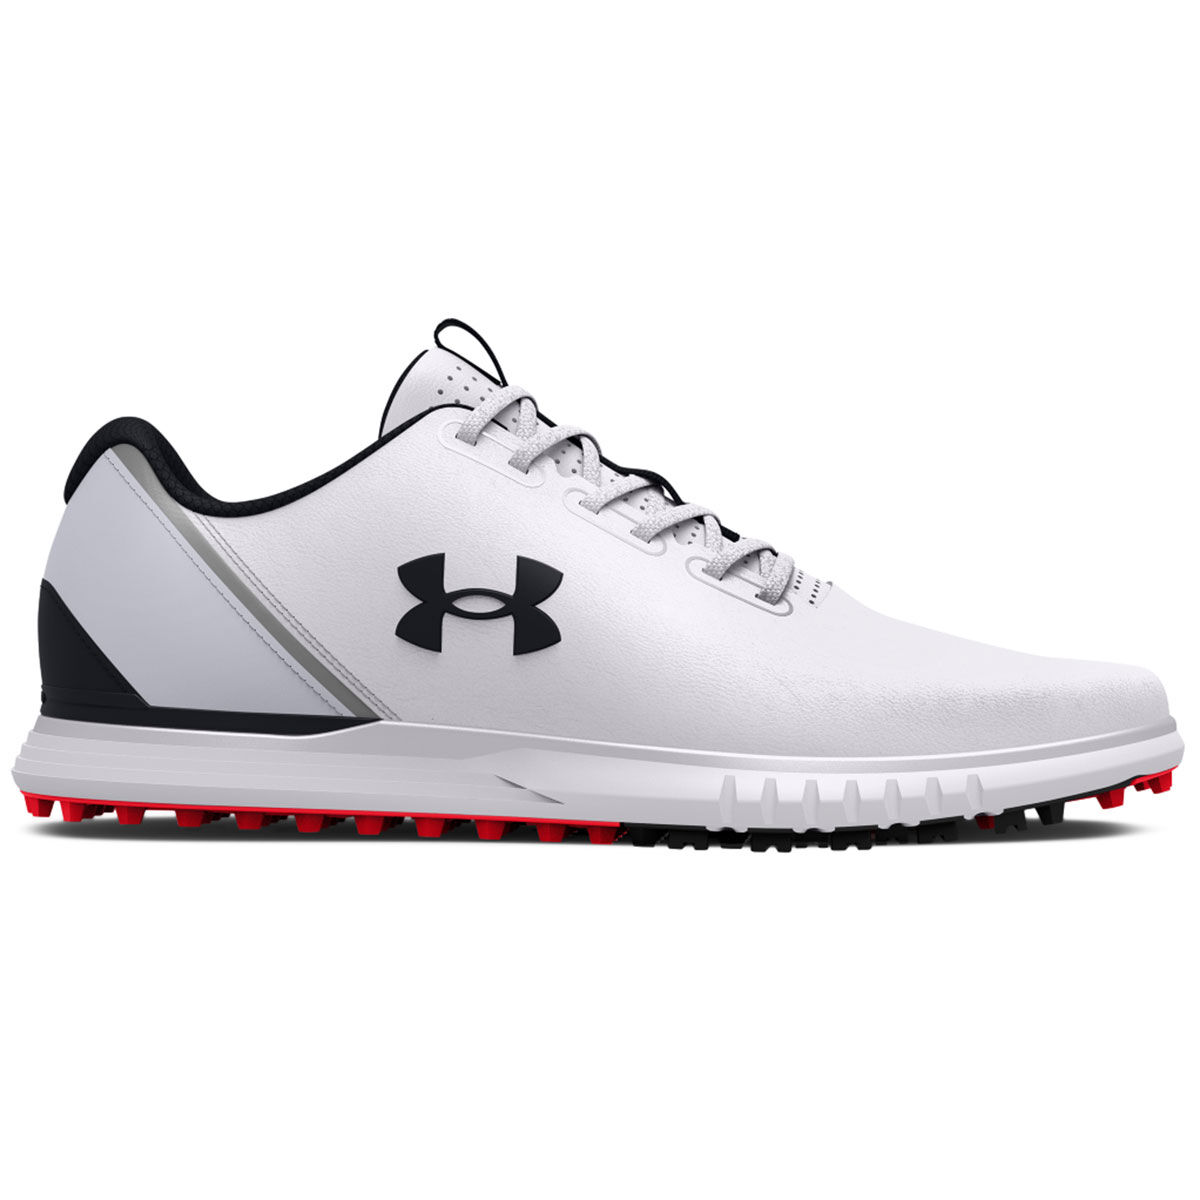 Under Armour Men’s Medal Waterproof Spikeless Golf Shoes, Mens, White/grey/black, 11 | American Golf